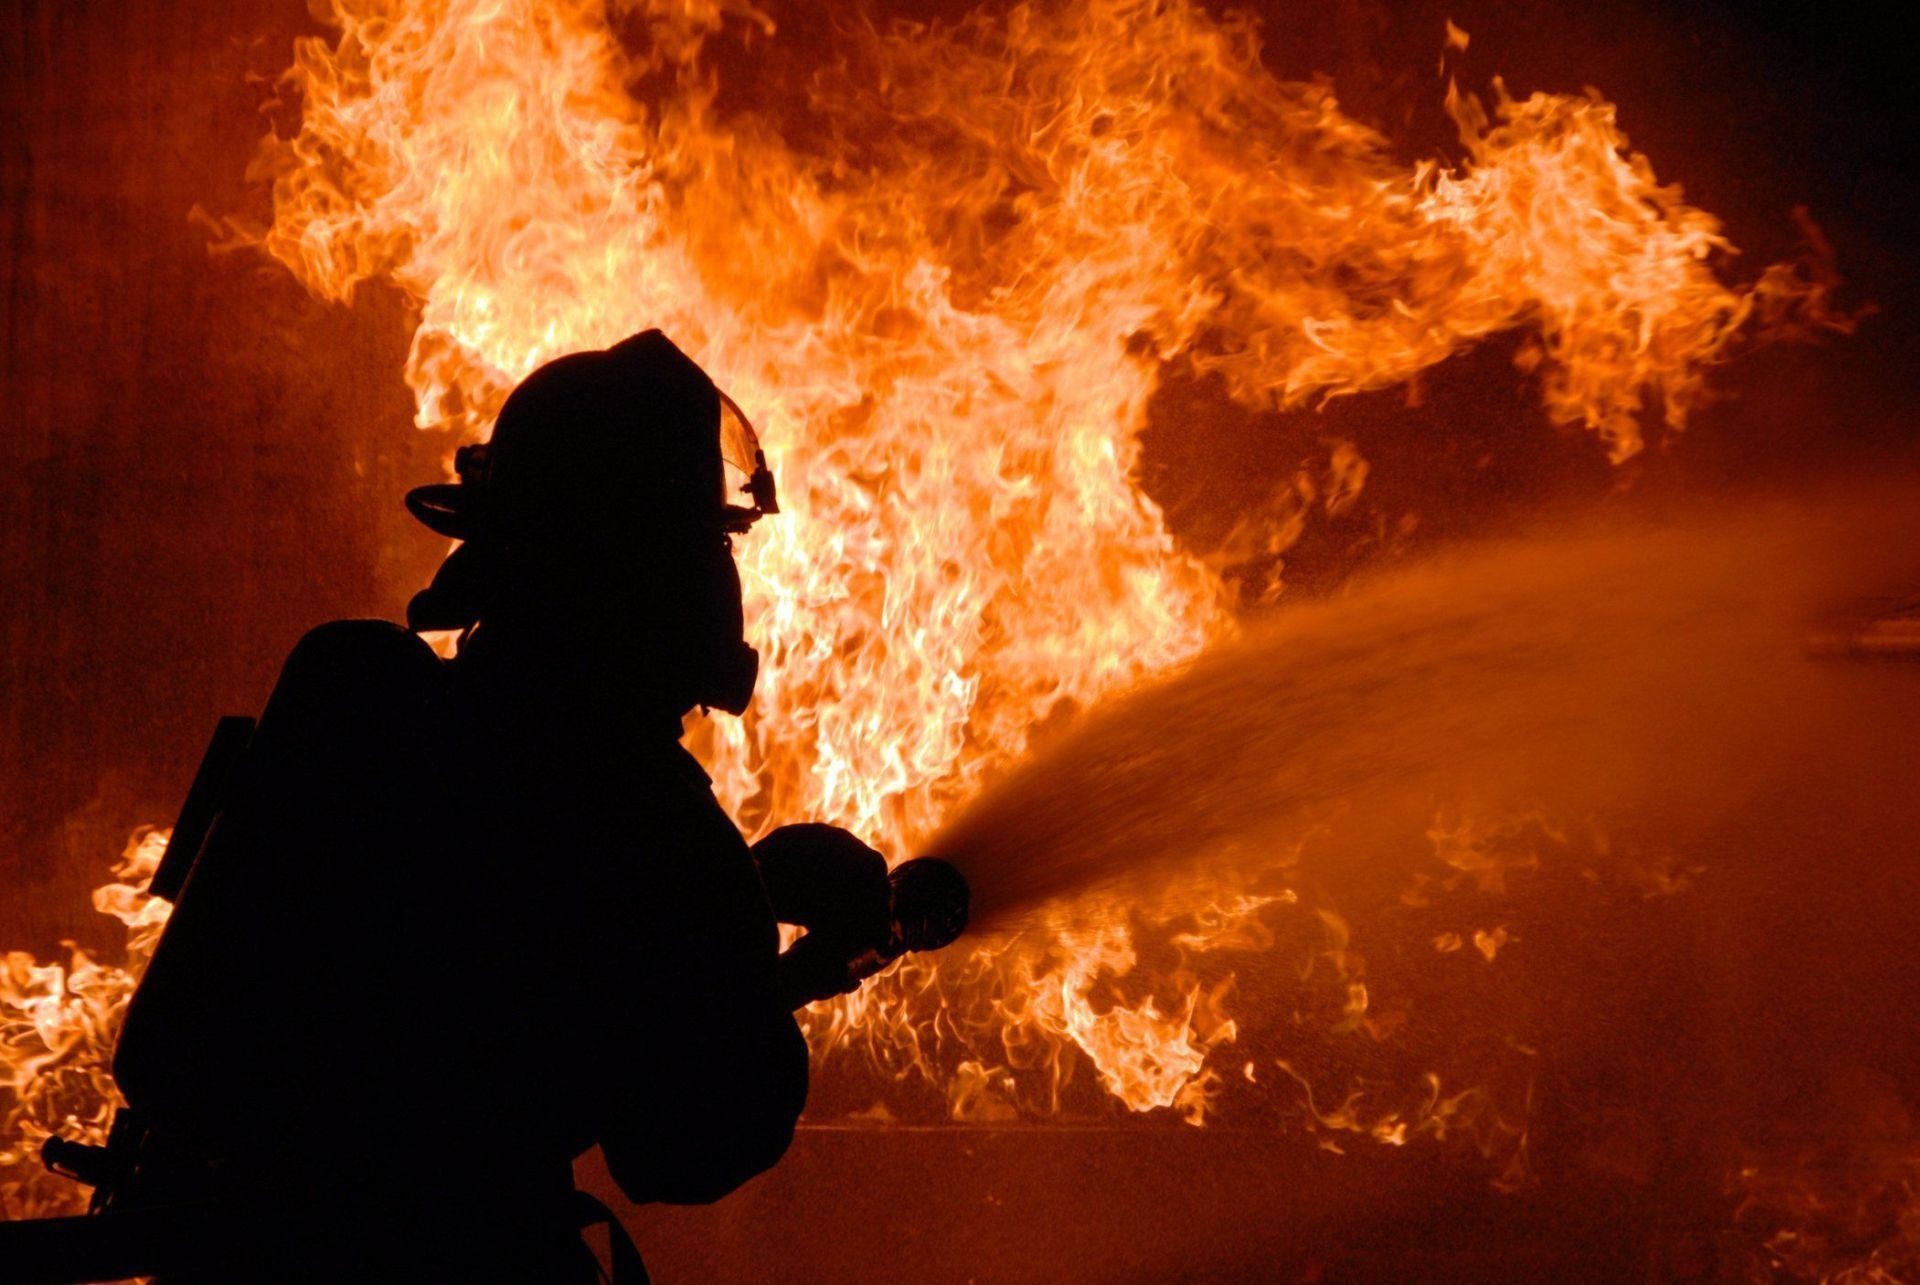 1920x1285 ... firefighting wallpaper backgrounds images reverse search ...